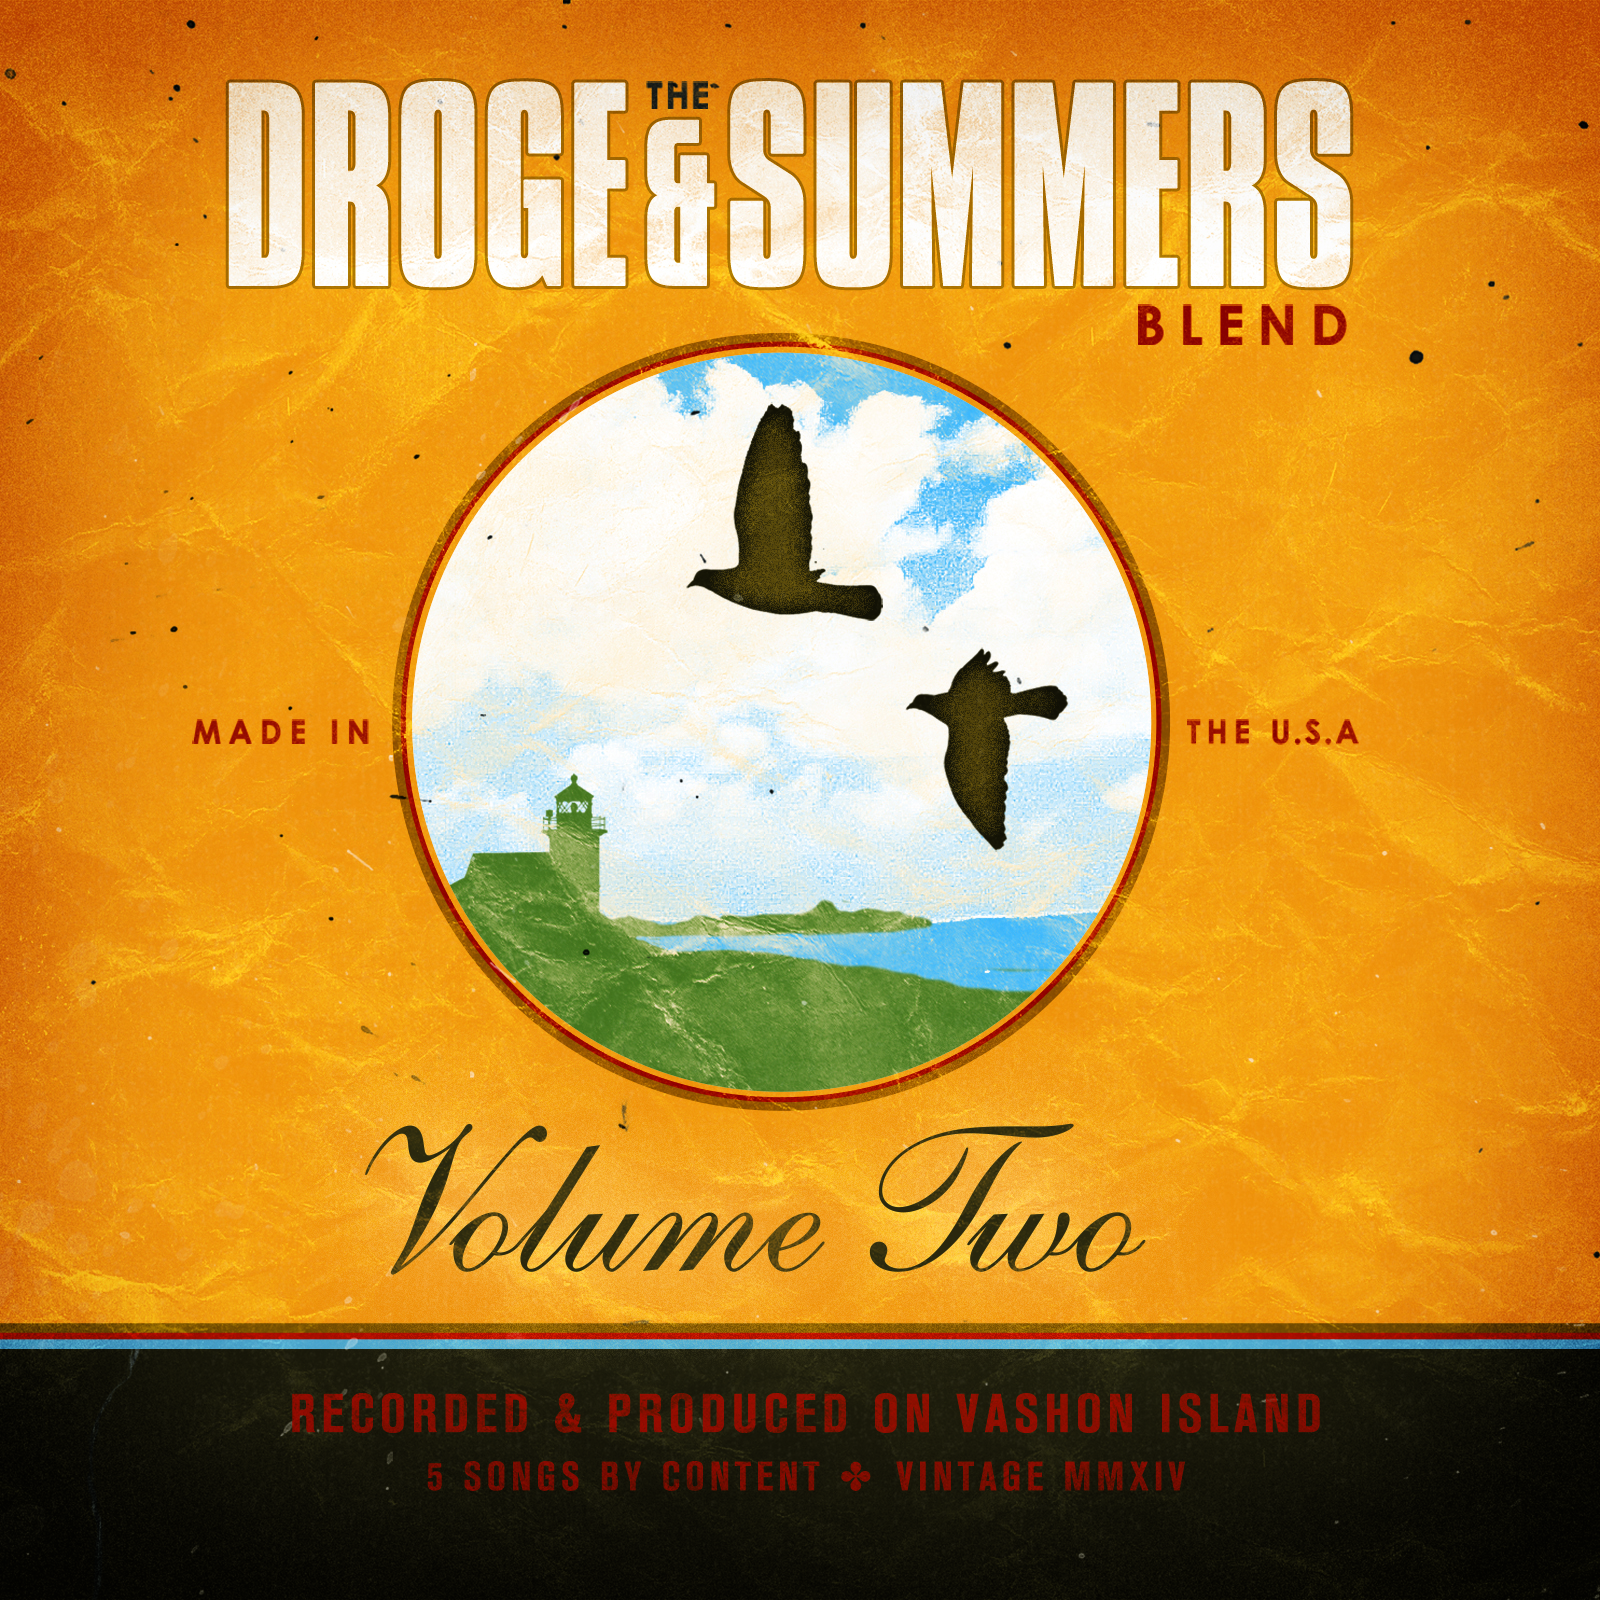 The Droge & Summers Blend Vol.Two